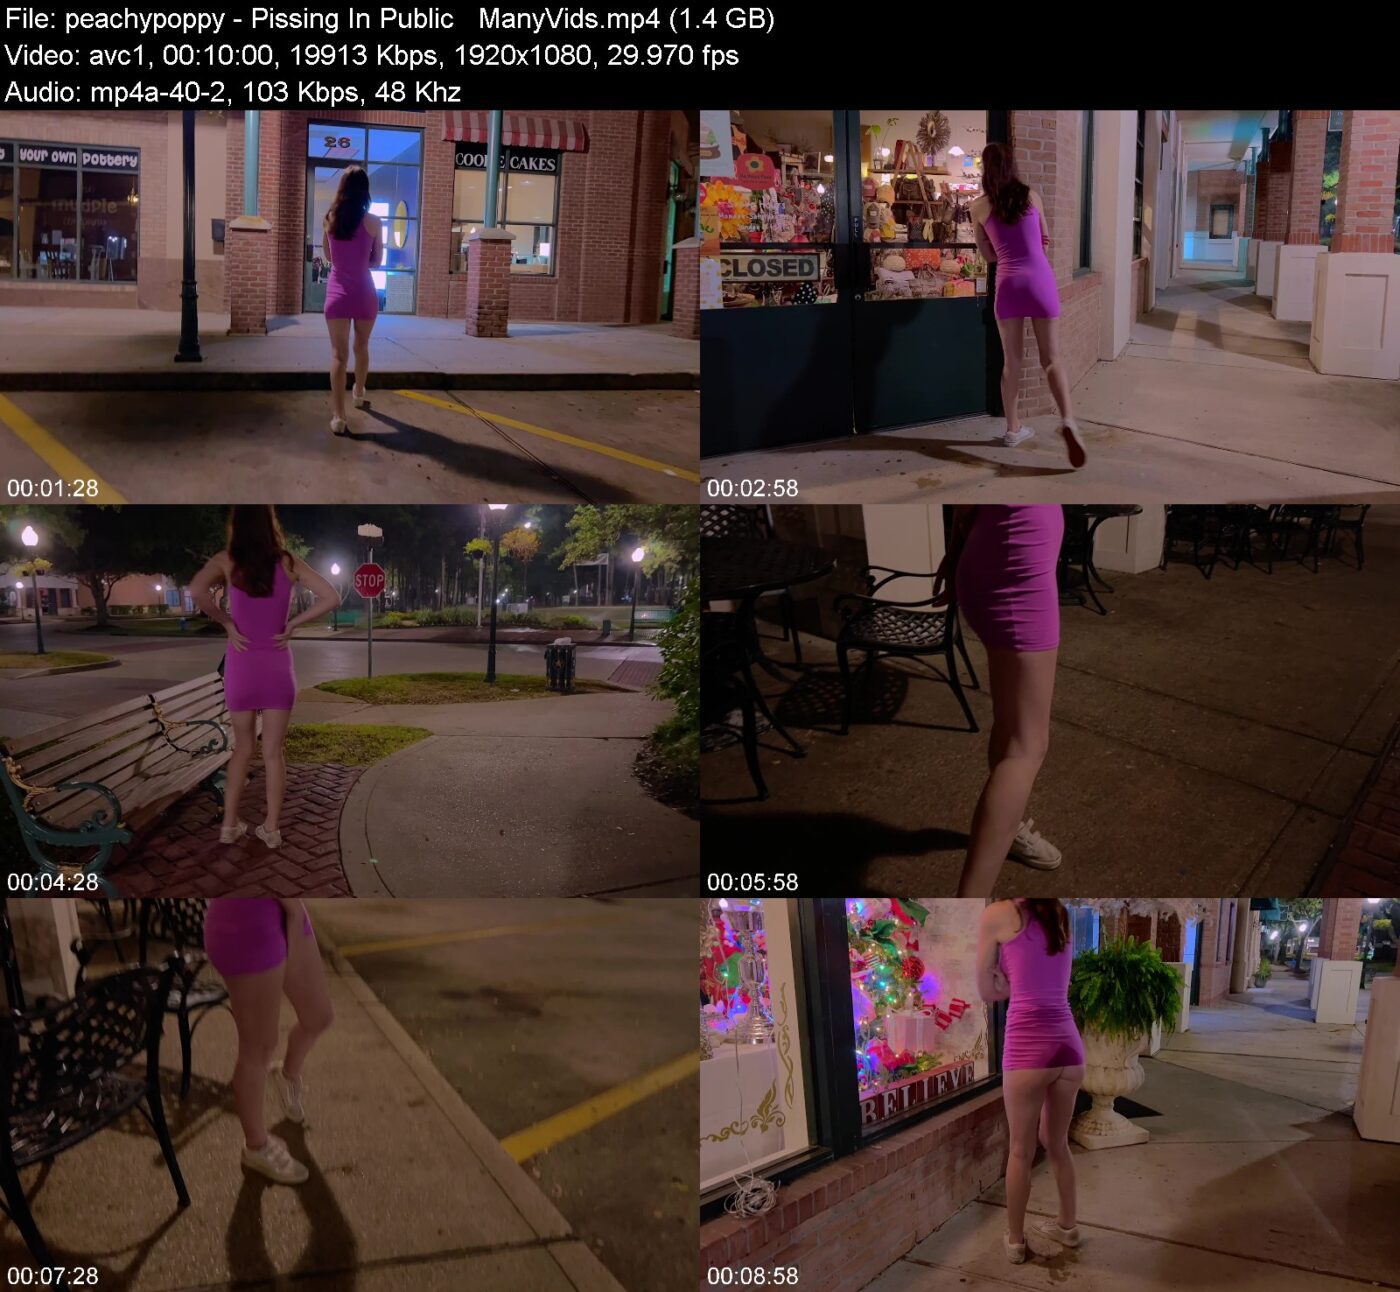 Actress: peachypoppy. Title and Studio: Pissing In Public   ManyVids